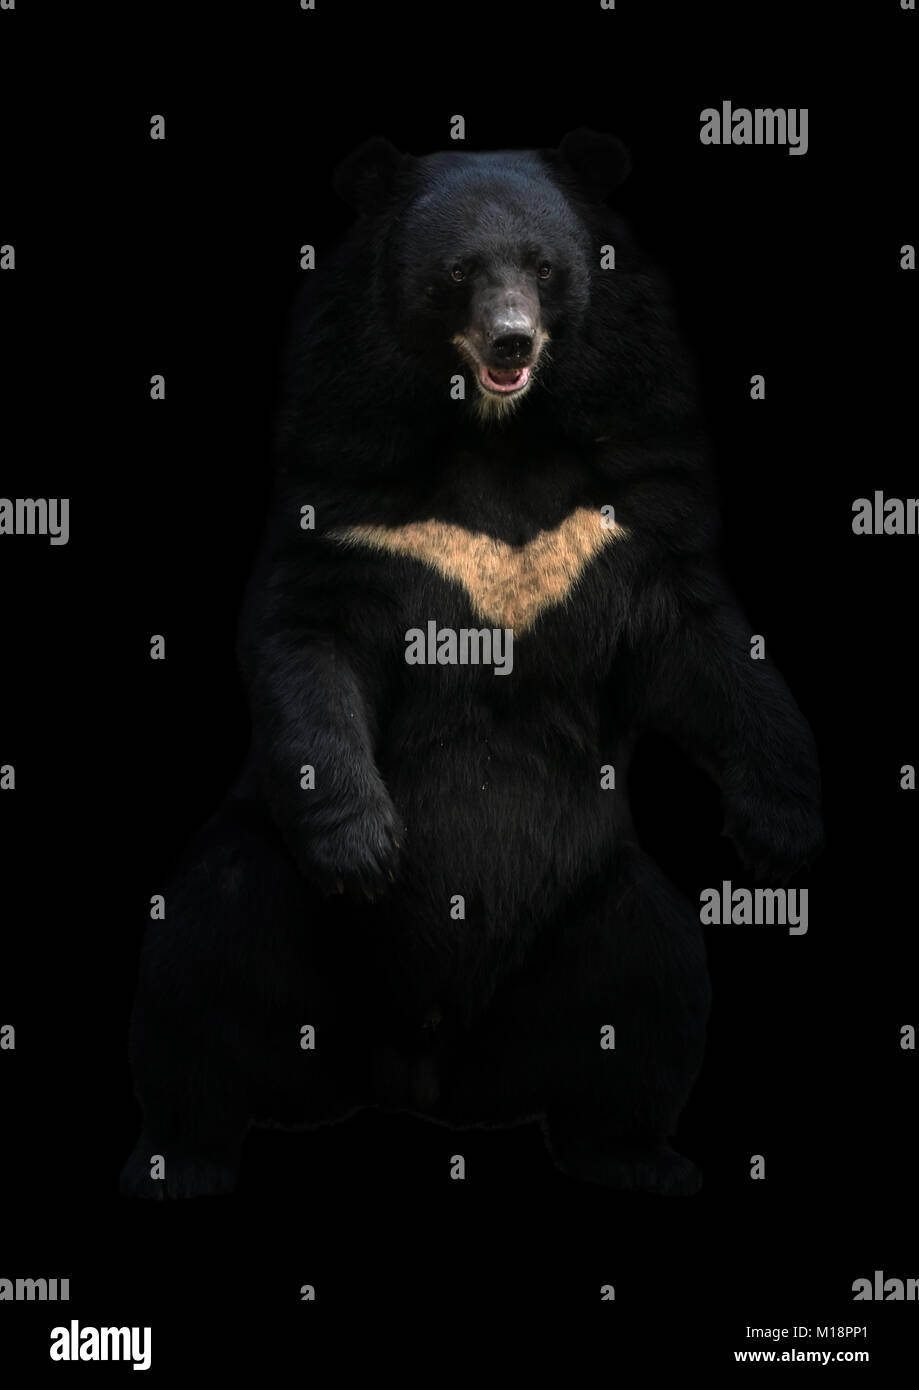 asiatic black bear or moon bear standing in the dark Stock Photo